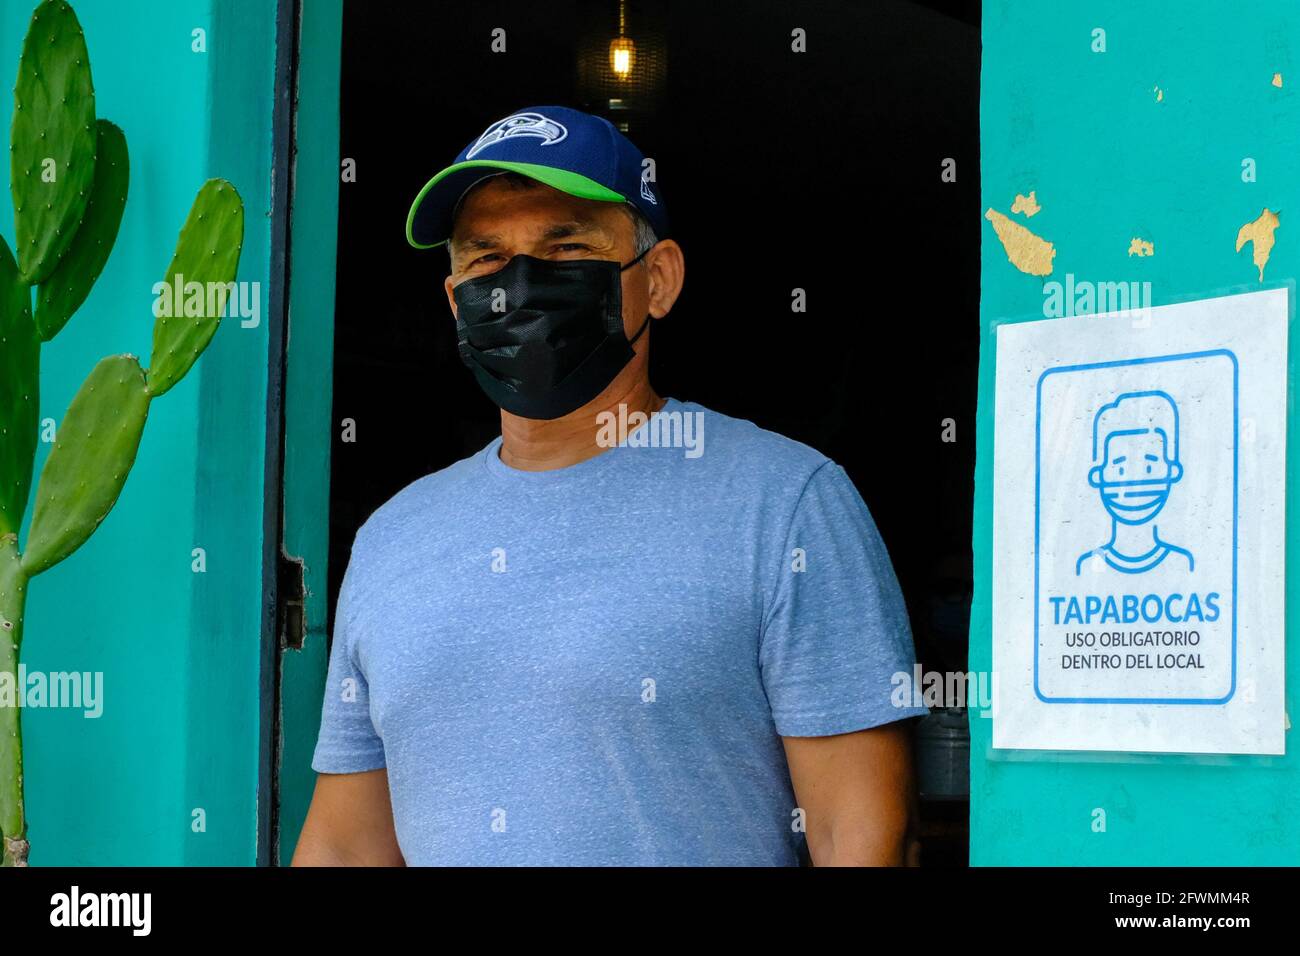 Man wearing mask and public Notice mandating people to wear a mask as they enter the establishment , Merida Mexico Stock Photo